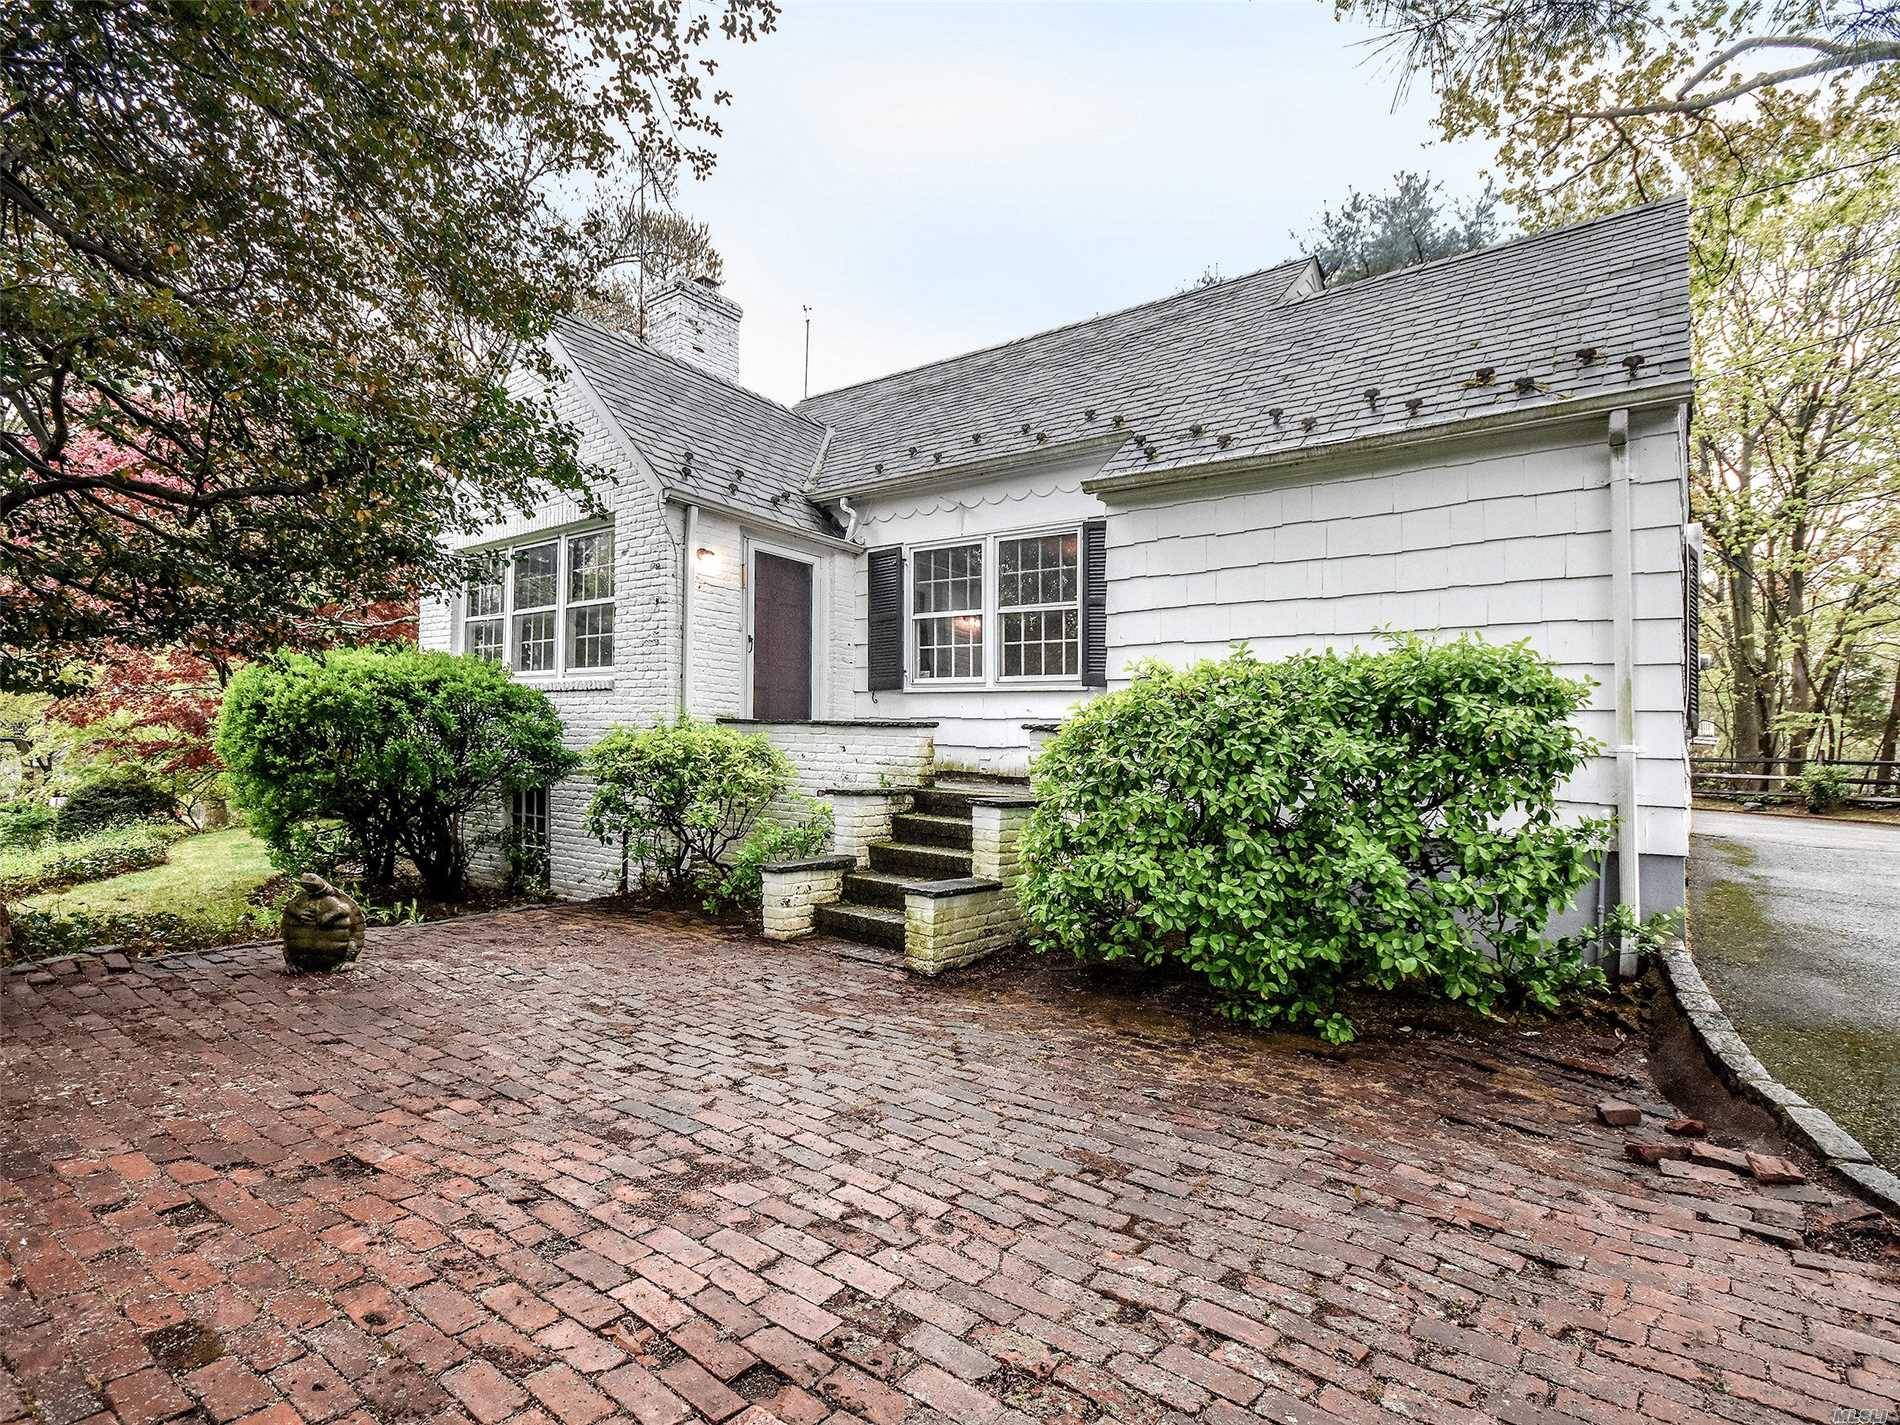 Quaint Charming Cape located in sought after Manhasset Bay Estates.